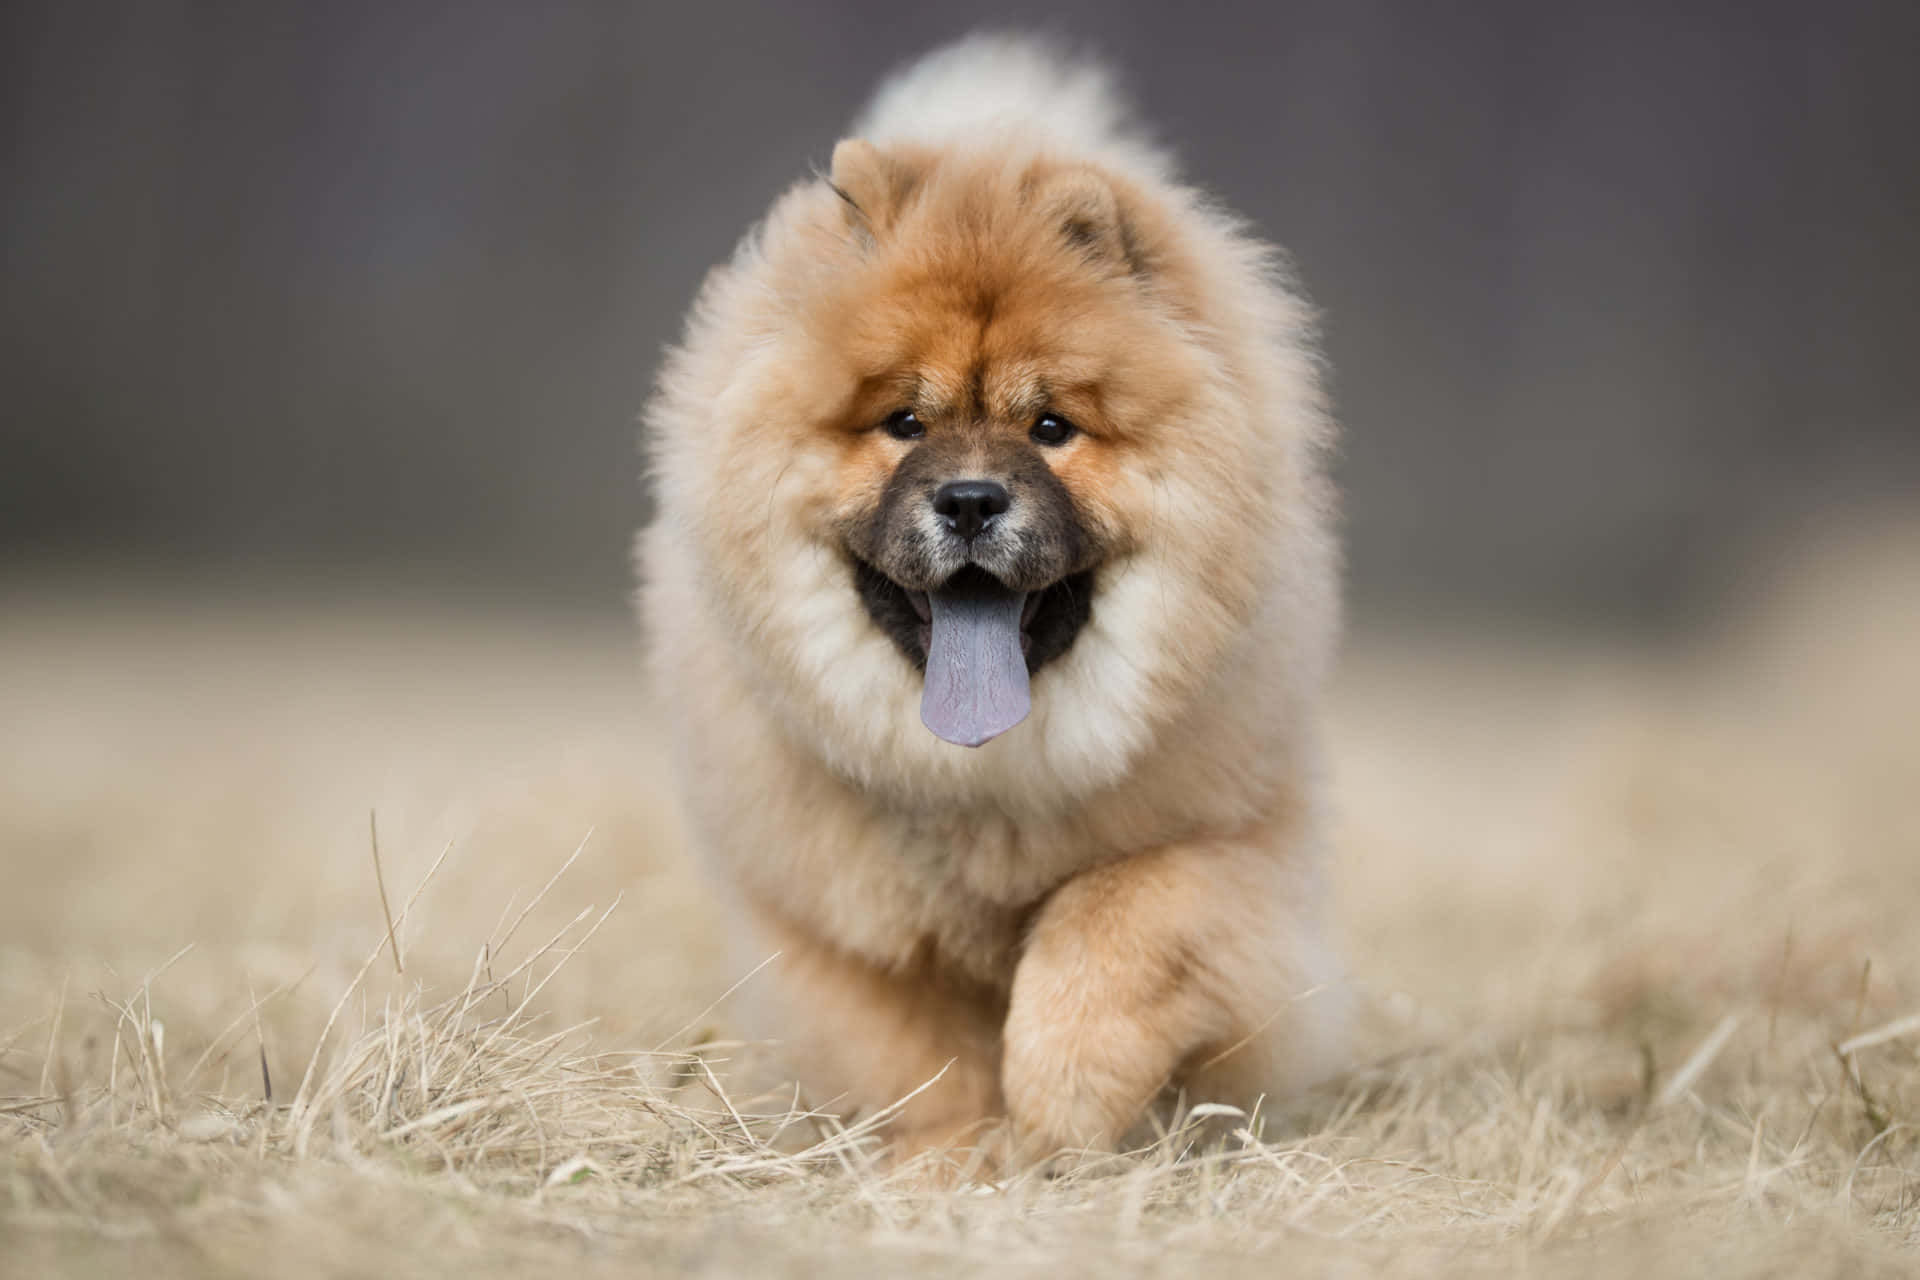 "Adorable Chow Chow Puppy"